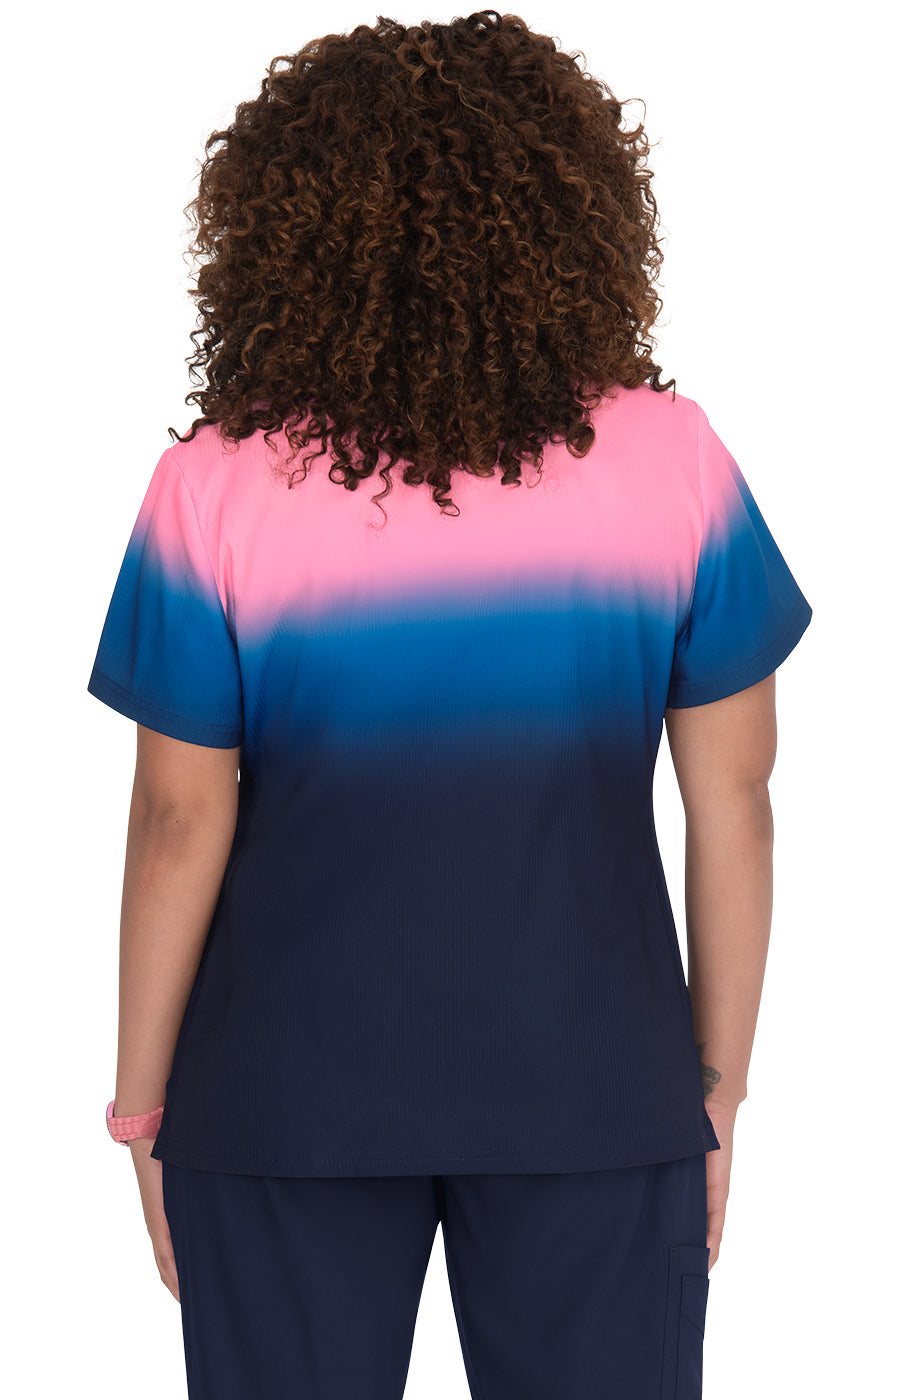 Reform Top Peony Pink/Royal Blue/Navy Ombre